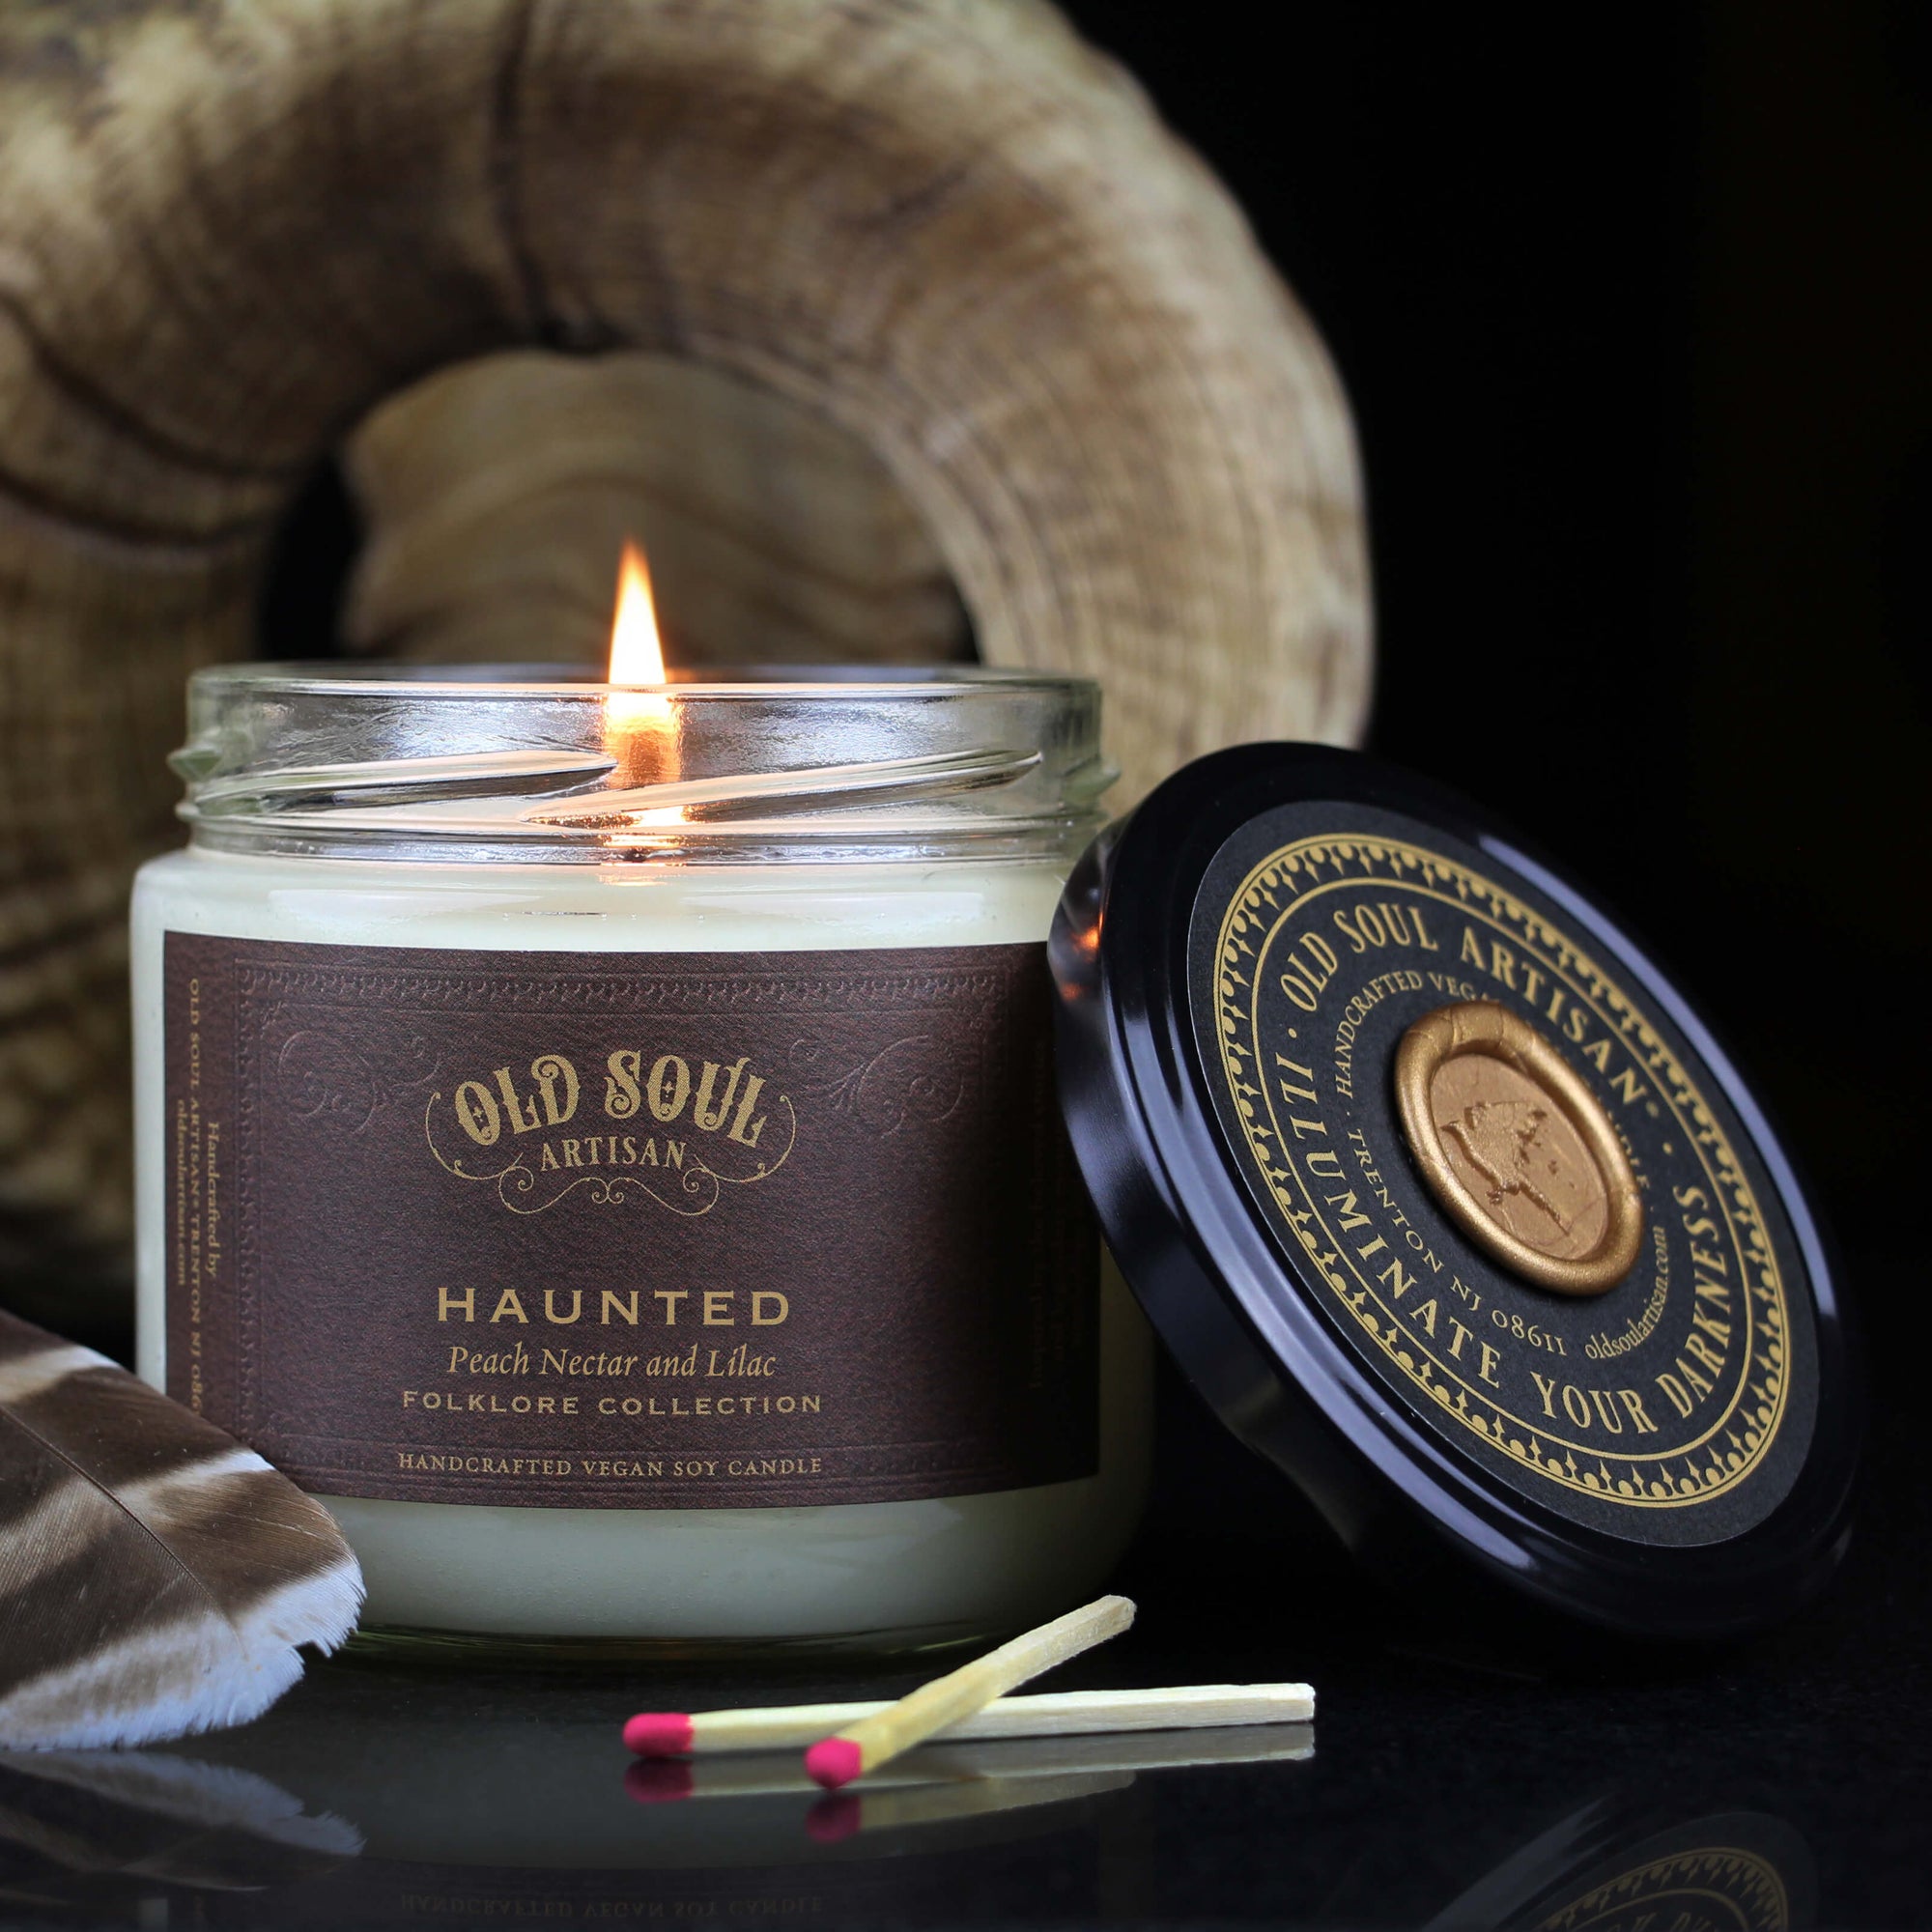 Haunted - Peach nectar and lilac soy candle